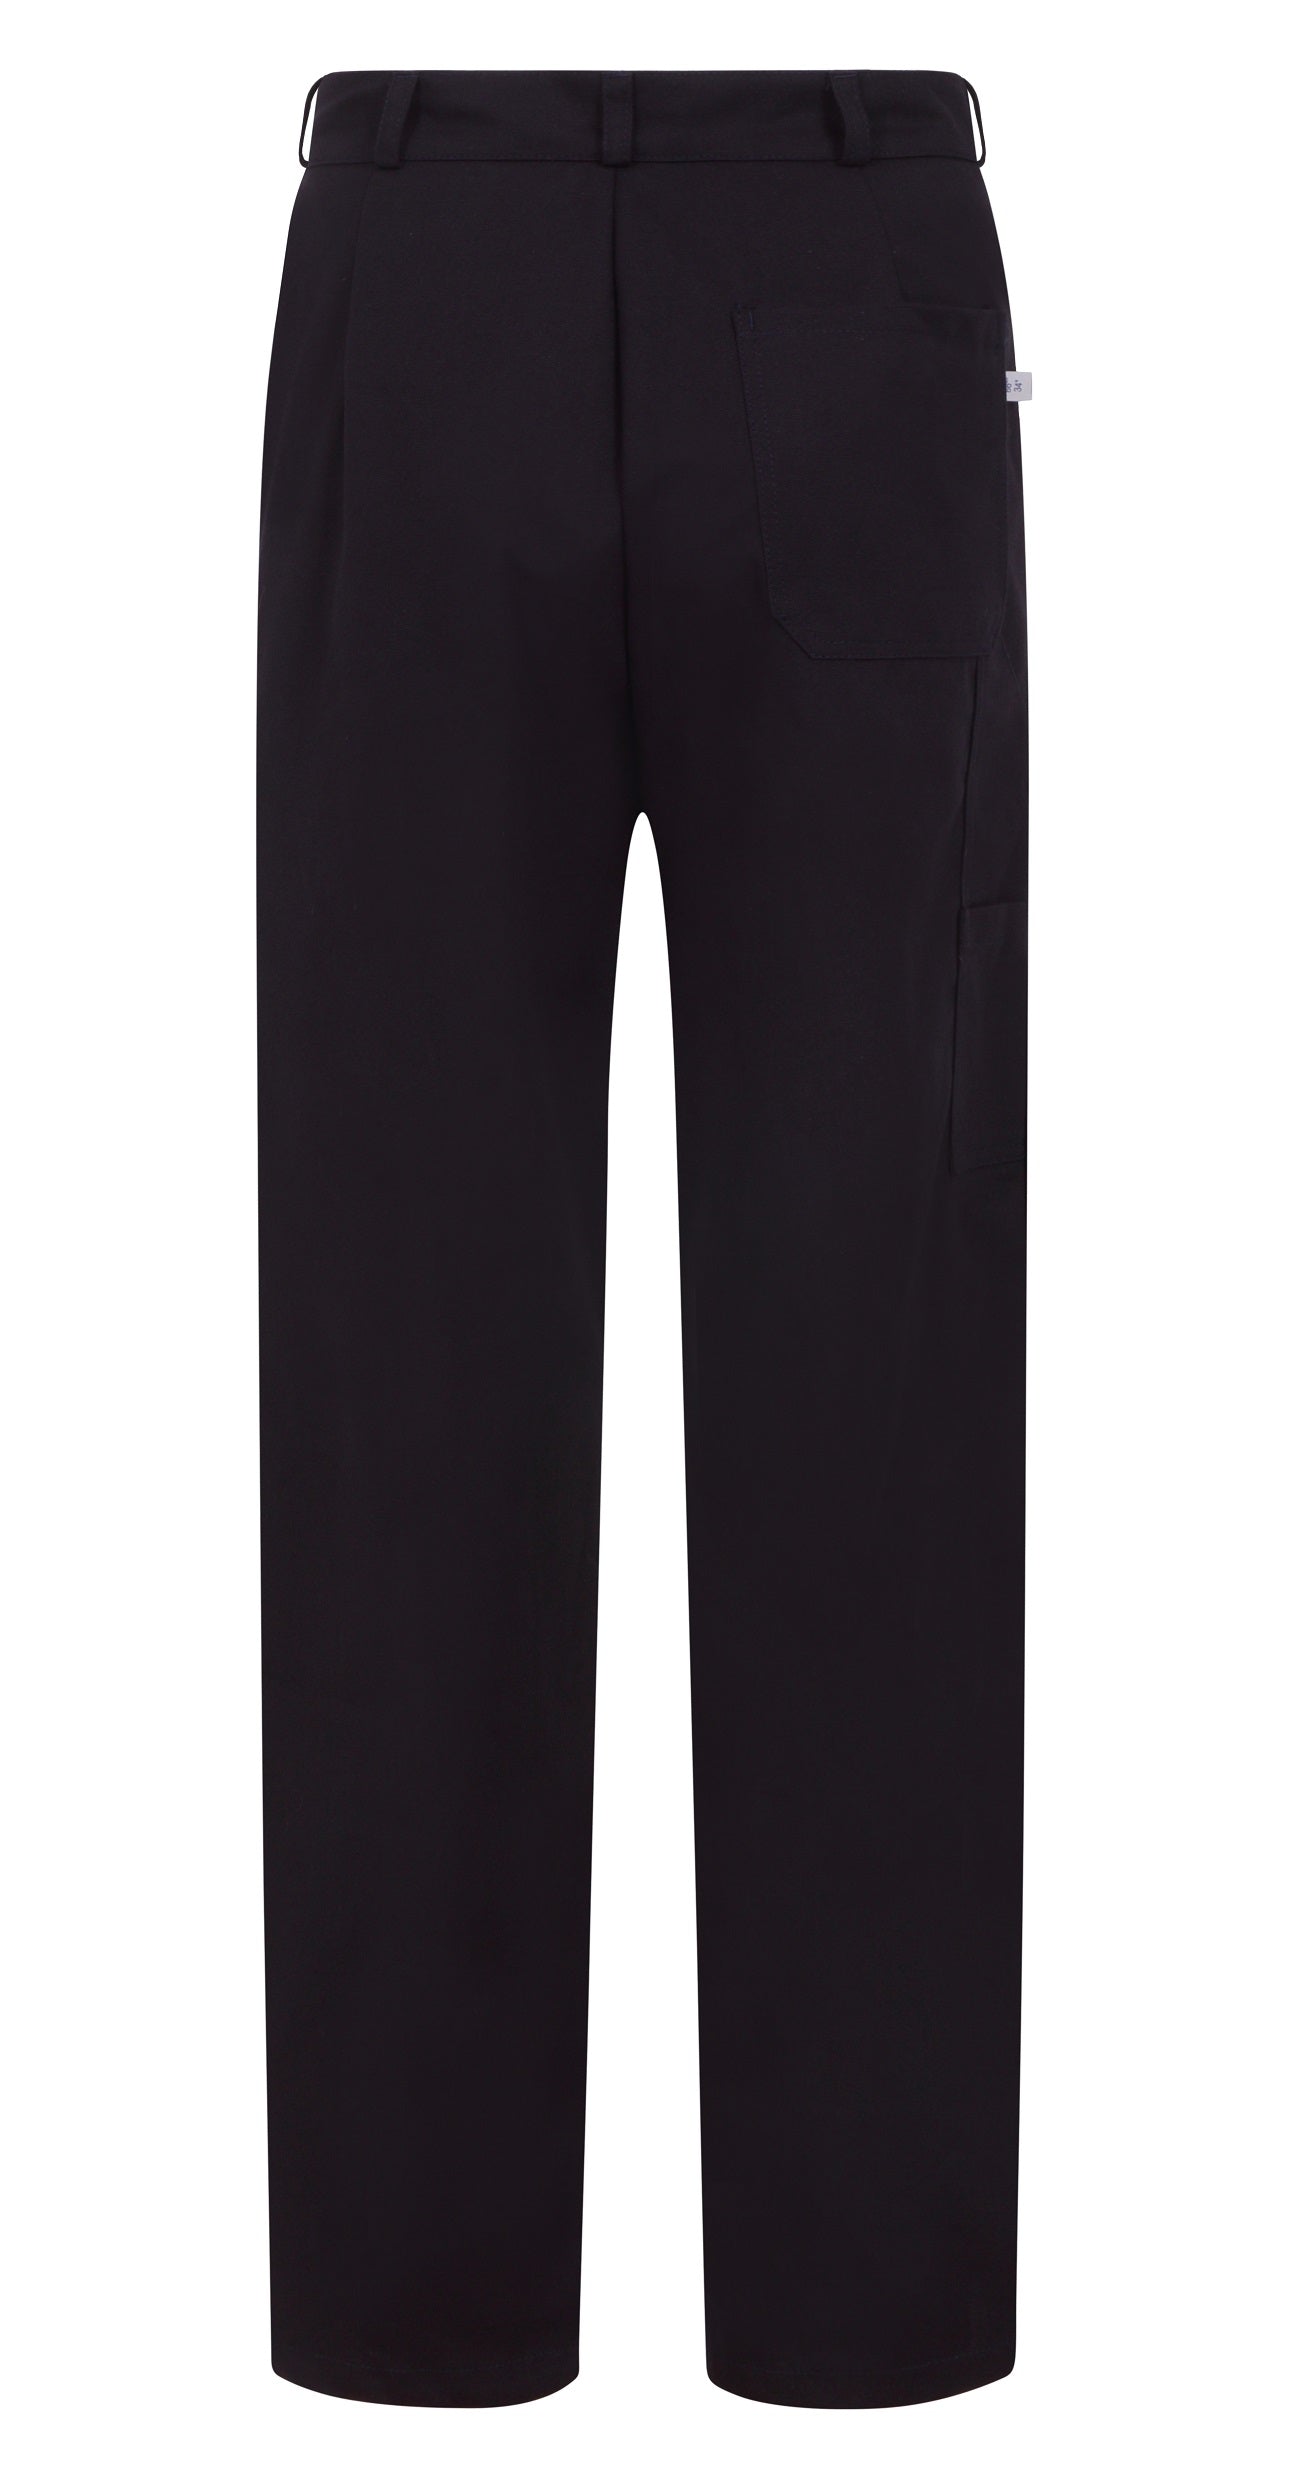 Yarmo Tunnel Band Sailcloth Work Trousers - TR011